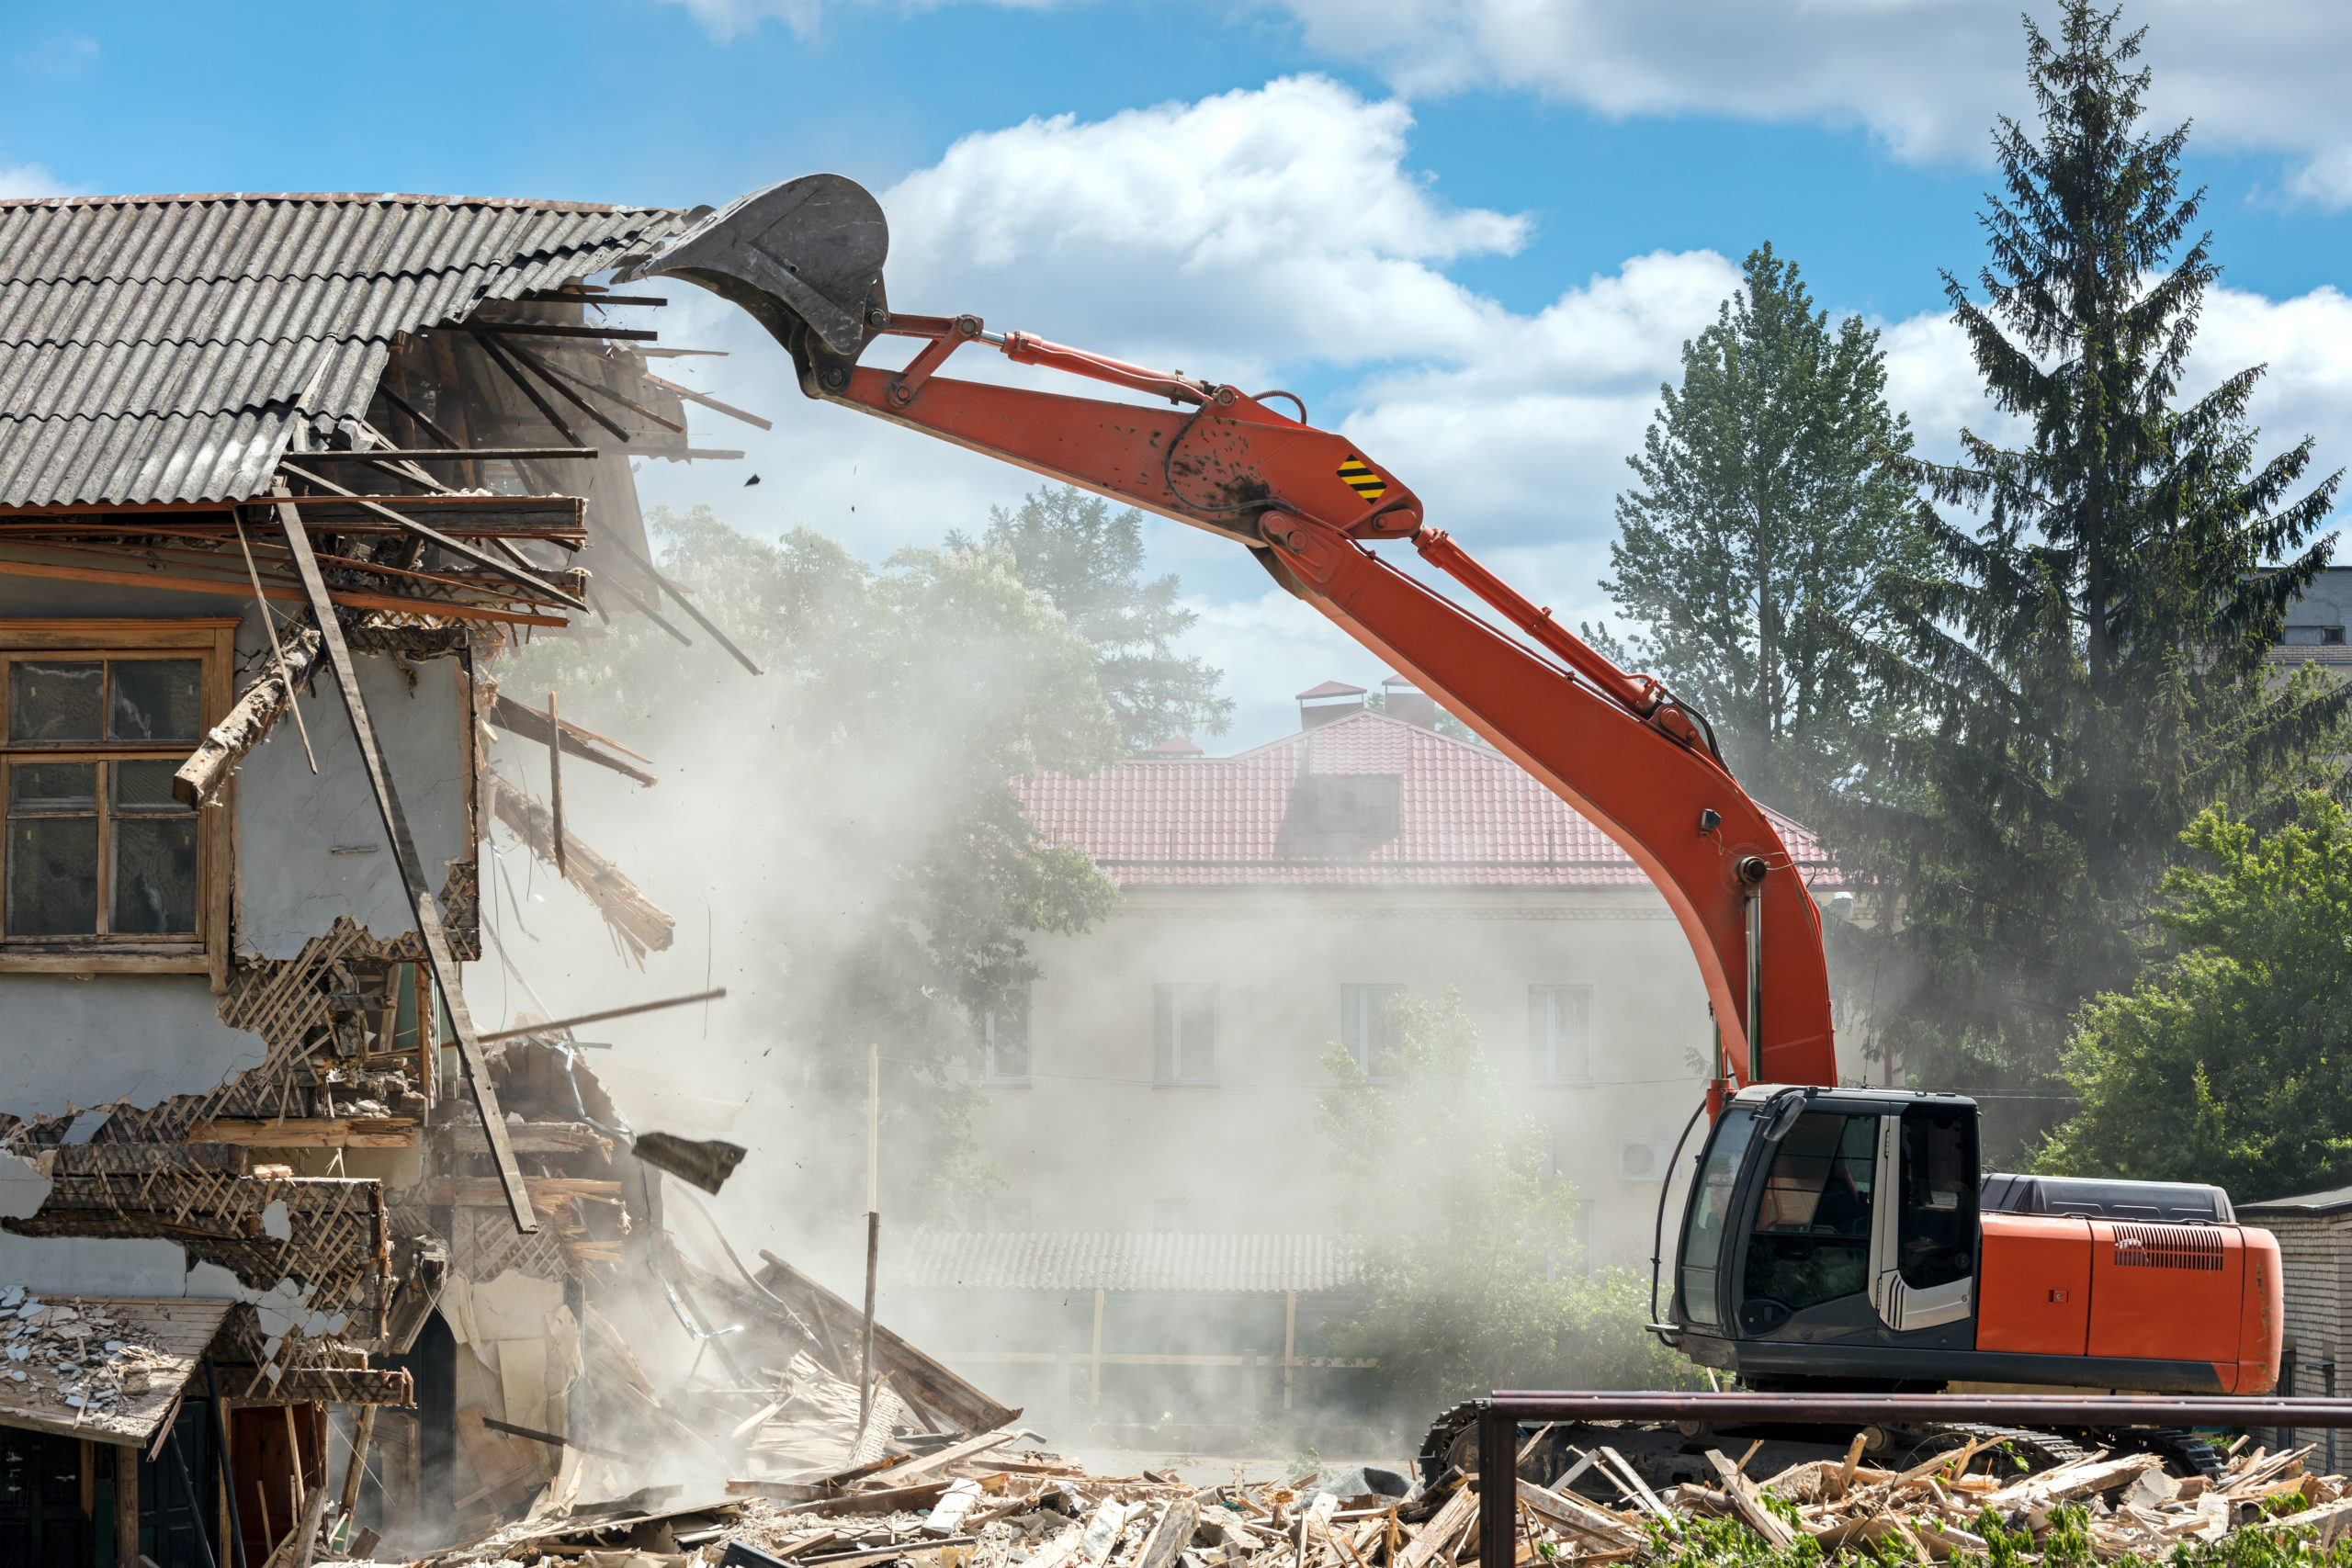 An excavator Demolishing a residential house.